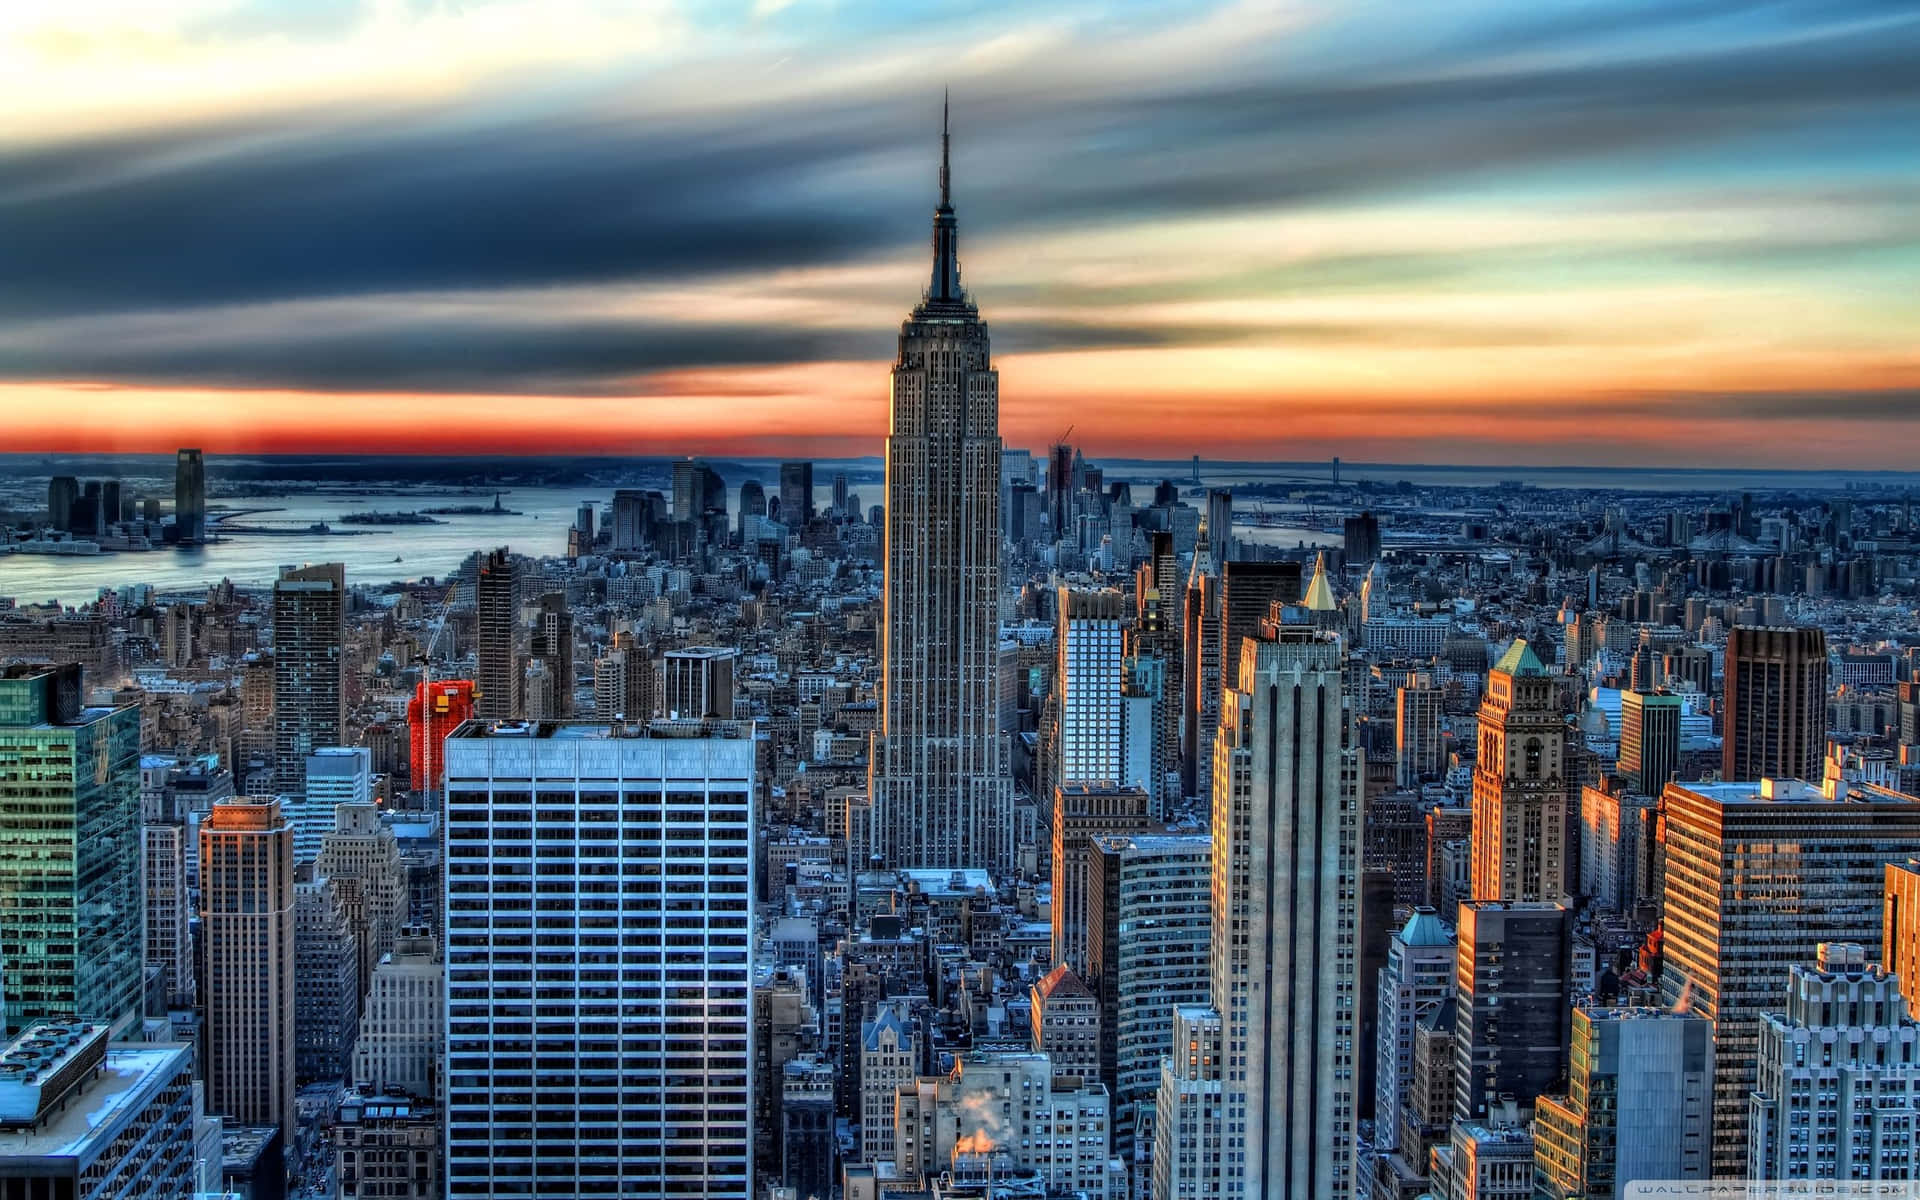 Here's To The Big Apple - Get Ready to Discover the Stunning New York City with the Ny Desktop Desktop Wallpaper Wallpaper